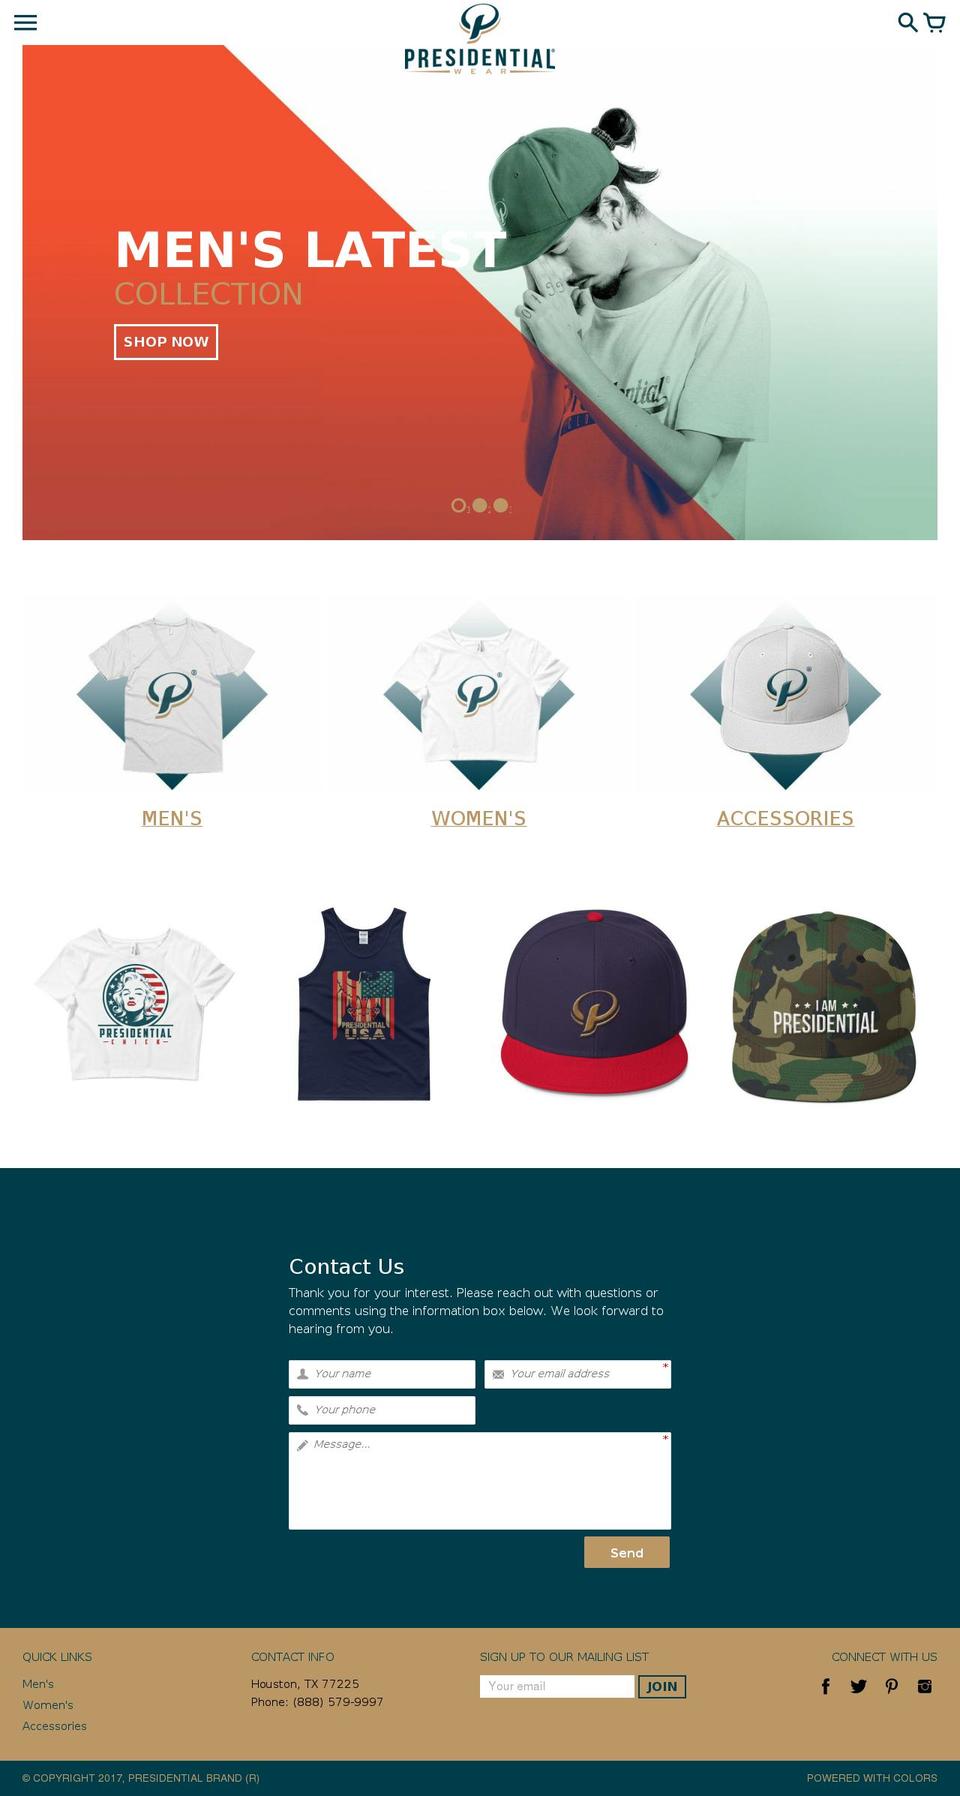 Colors Shopify theme site example presidential10.com